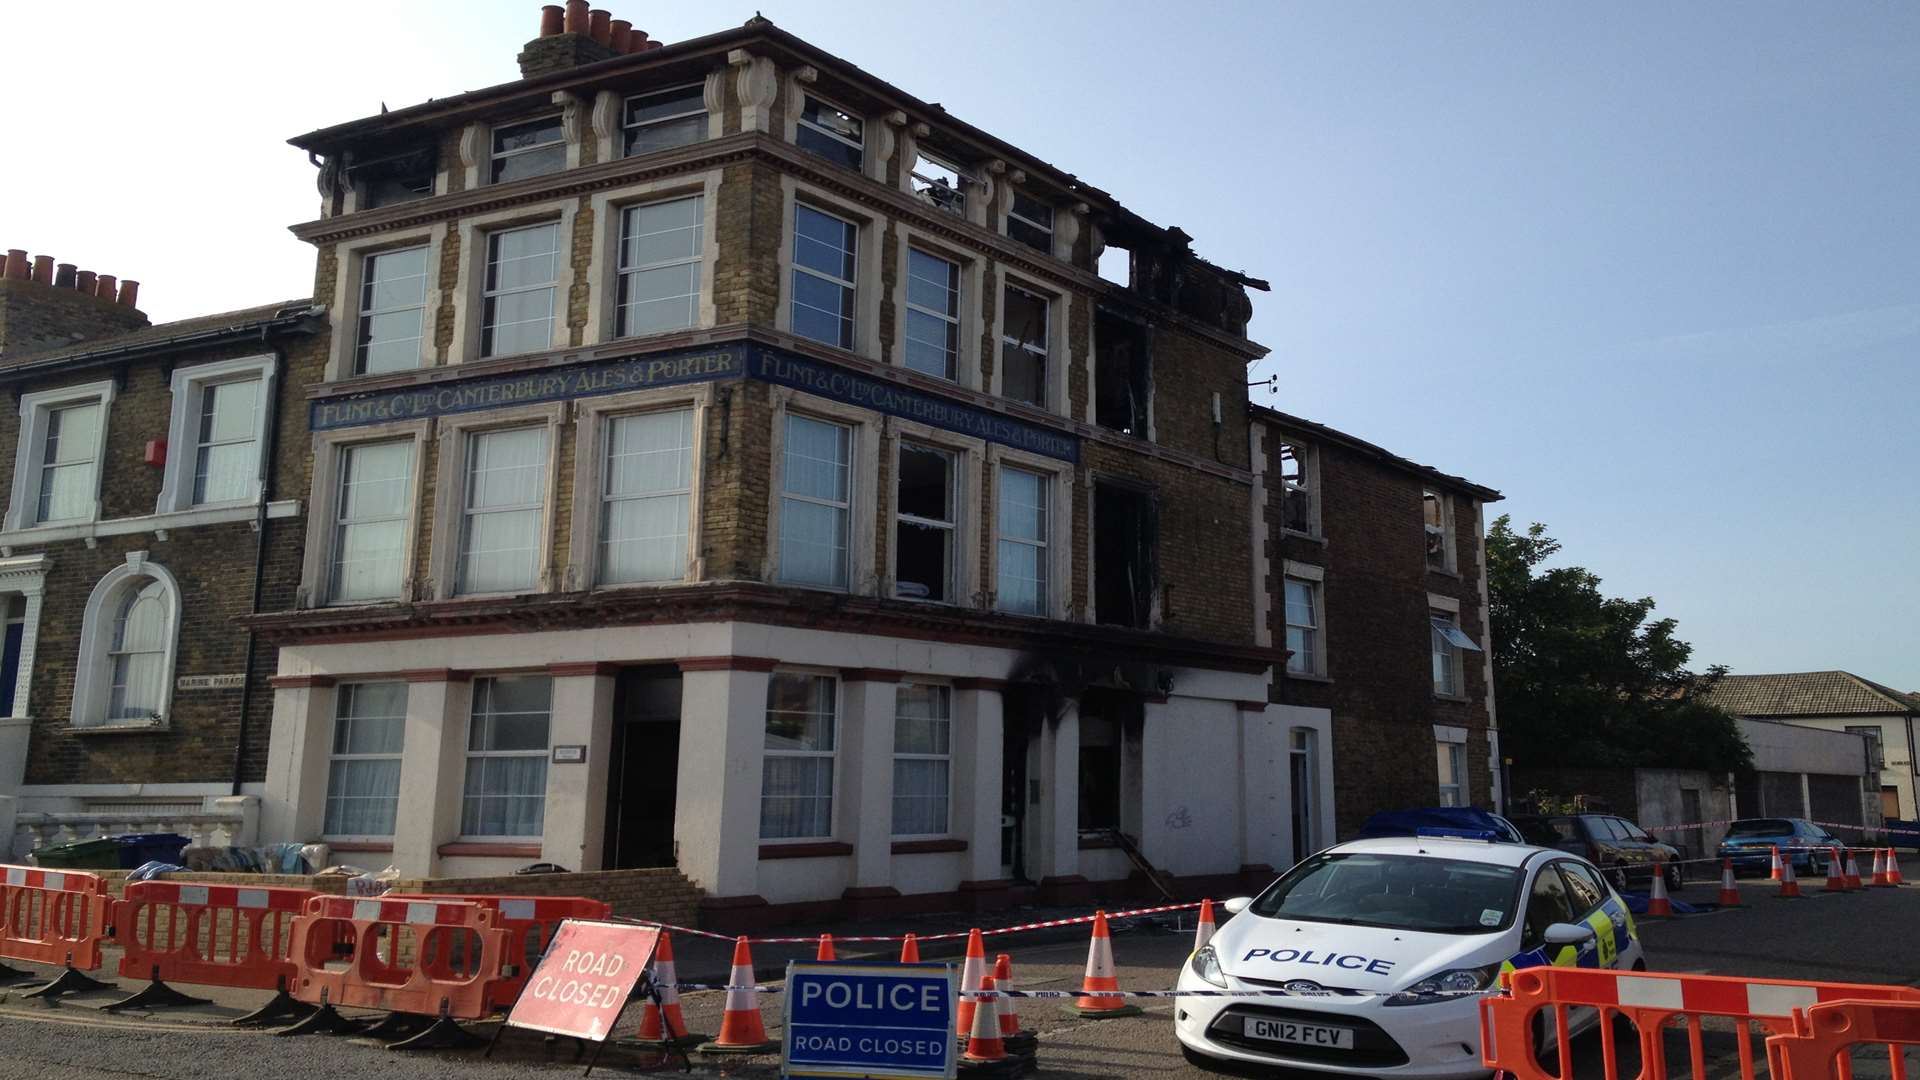 Police at the scene of the fire in Sheerness this morning